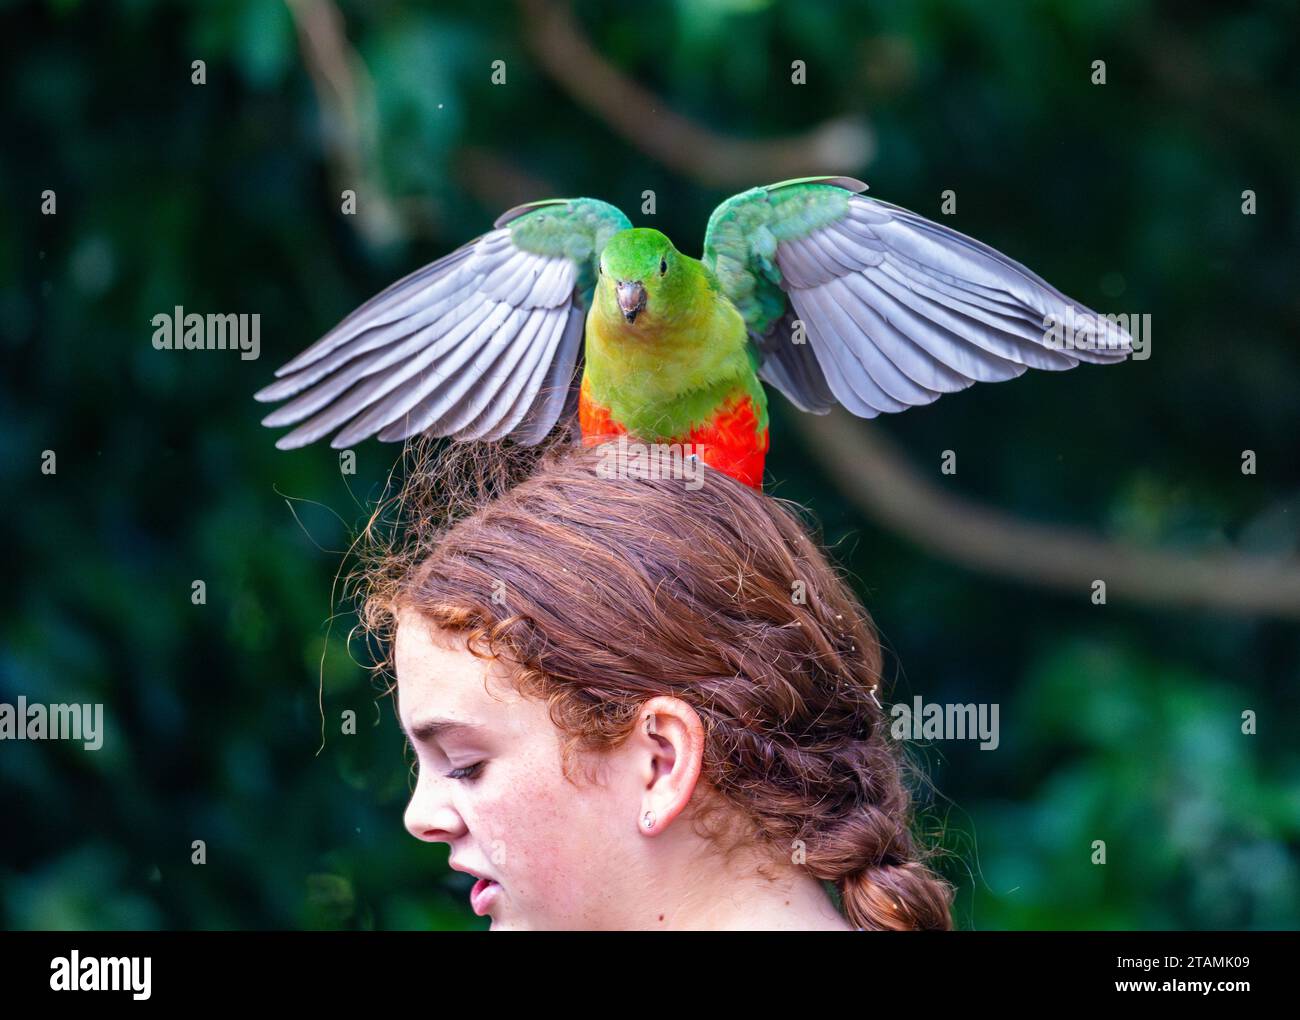 An Australian King-Parrot (Alisterus scapularis) landed on the head of a young girl. Queensland, Australia. Stock Photo